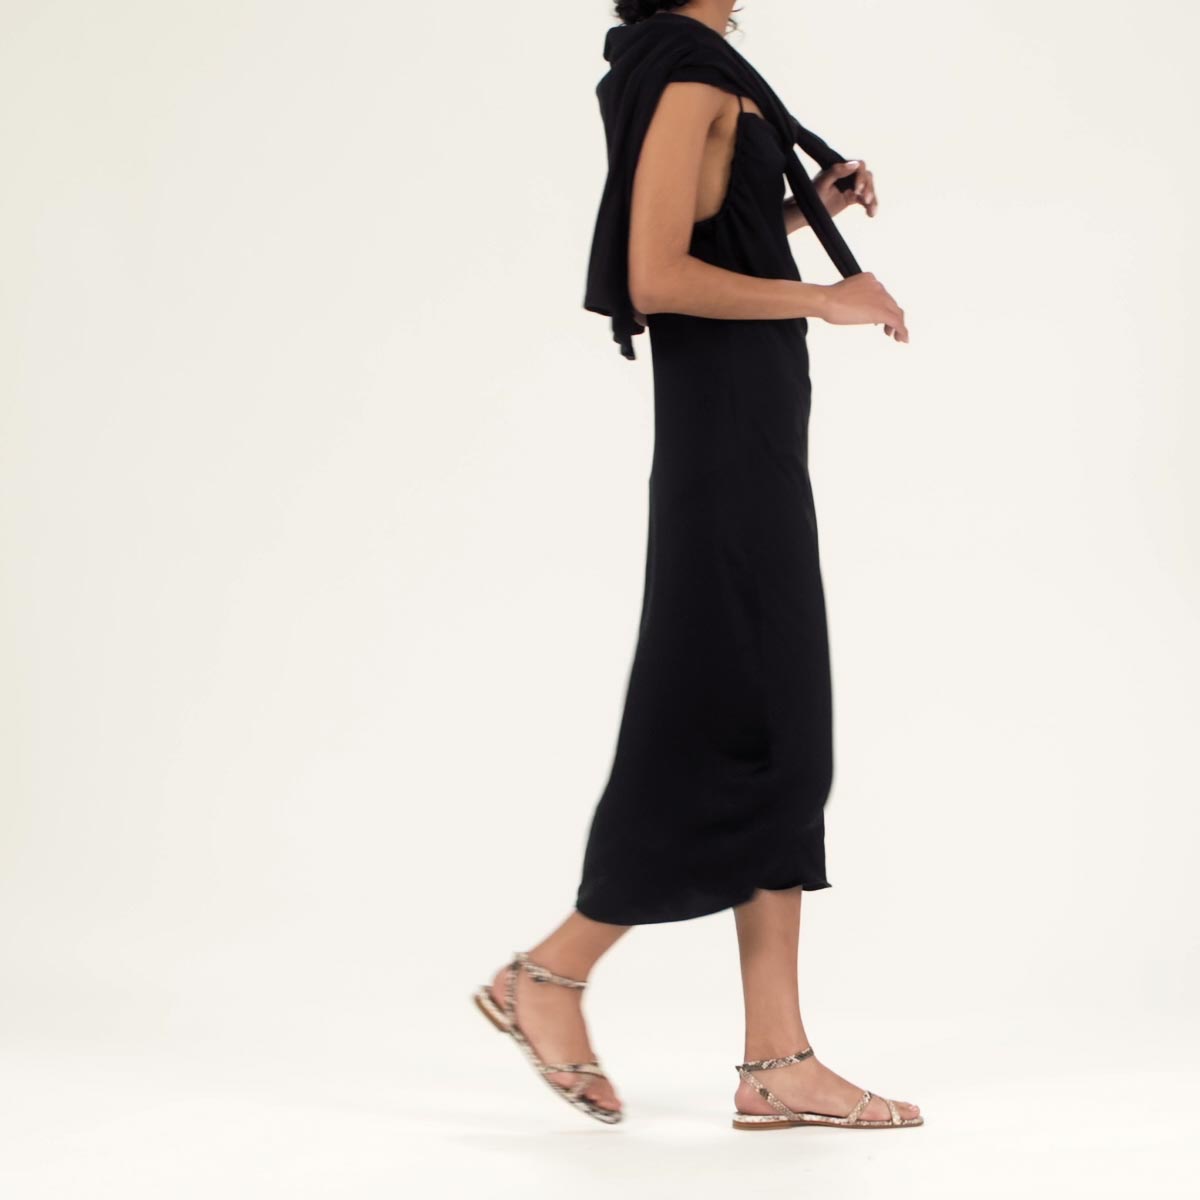 The Flat Sandal in Python Embossed shown on model styled with a black midi dress and a black sweater tied over the shoulders.